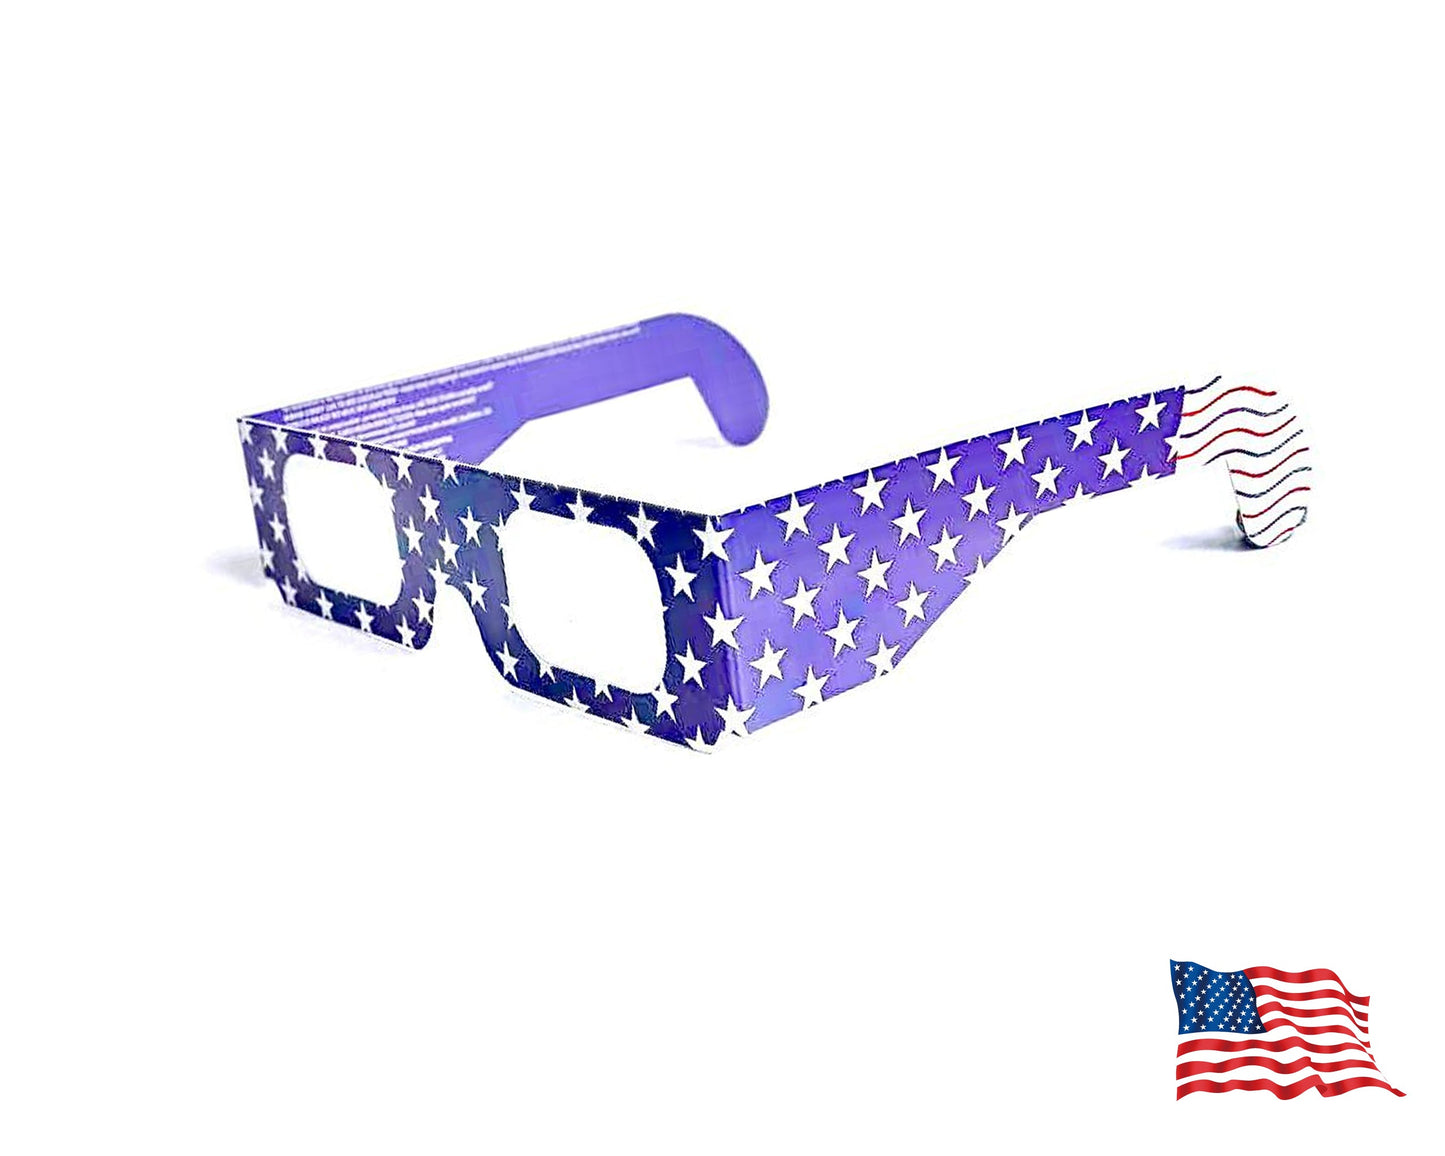 Solar eclipse viewing glasses with white paper frame printed with an American flag motif